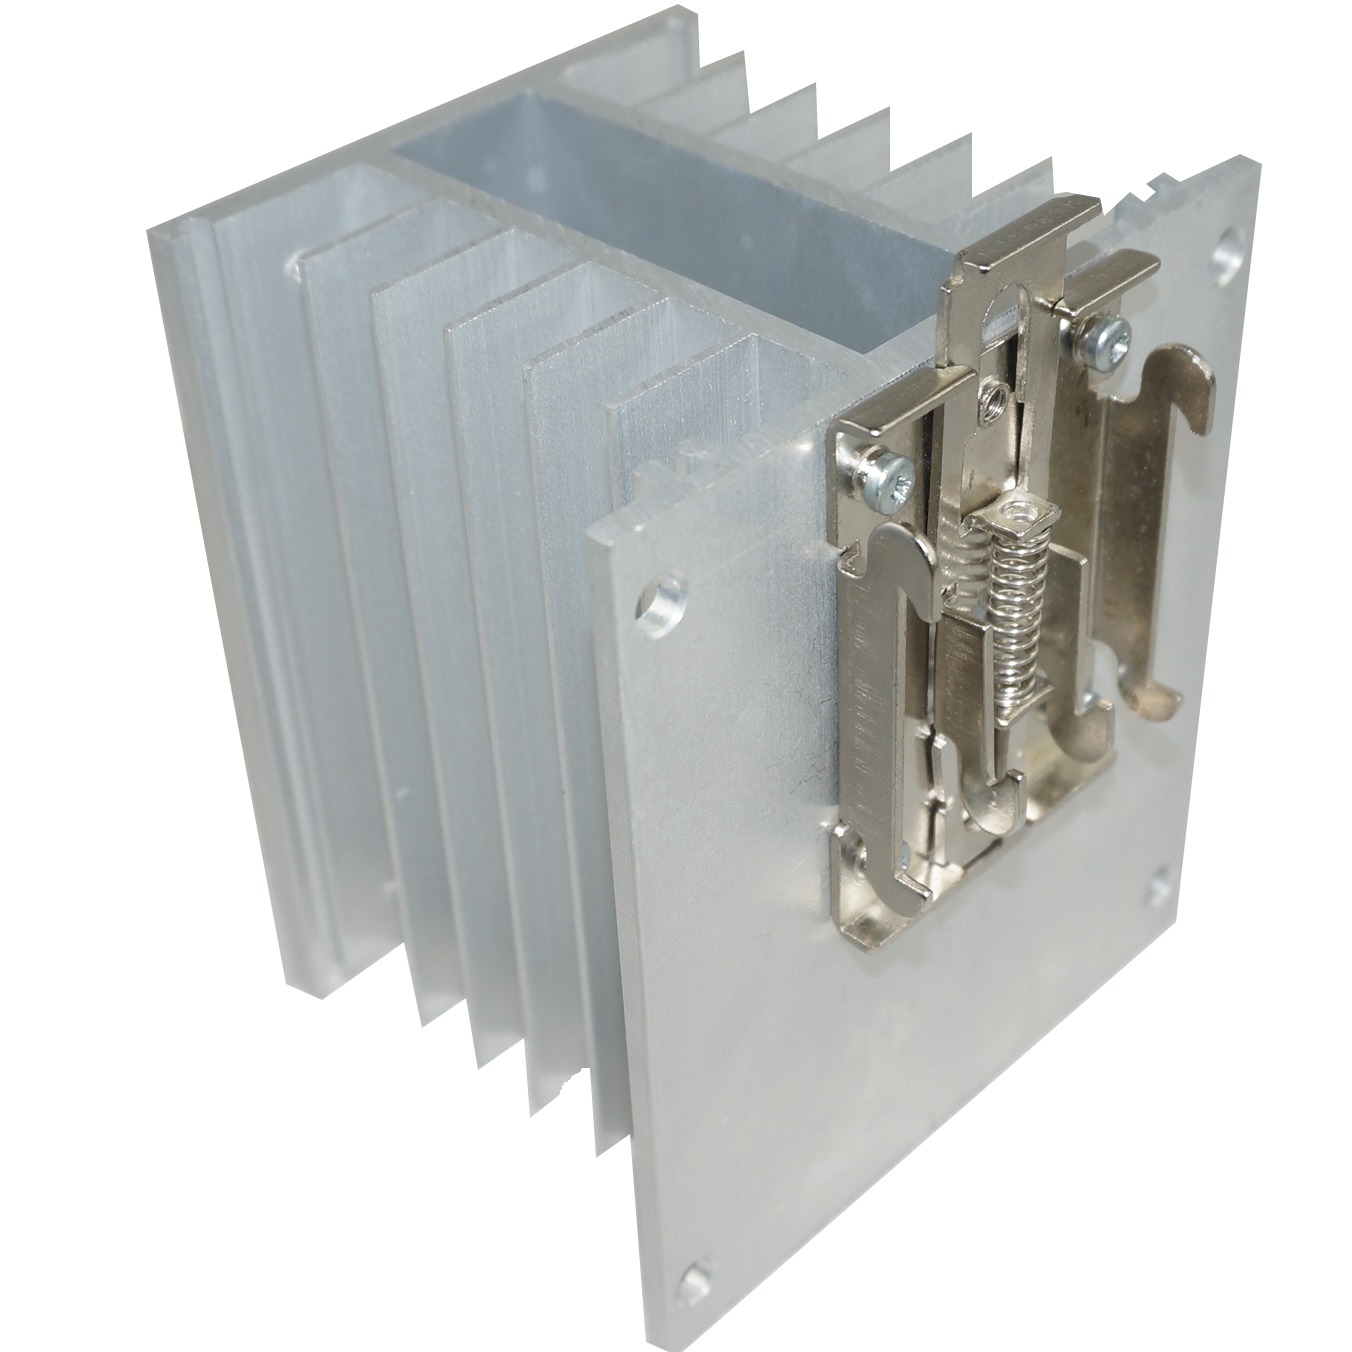 FTH6053ZA4 + HS212DR, Solid State Relay, and Heatsink Assembly, 3 Phase 90-280VAC Control, 20 Amp per phase @ 40 Deg C, 48-530VAC Load, LED Status Indicator, with IP20 Cover